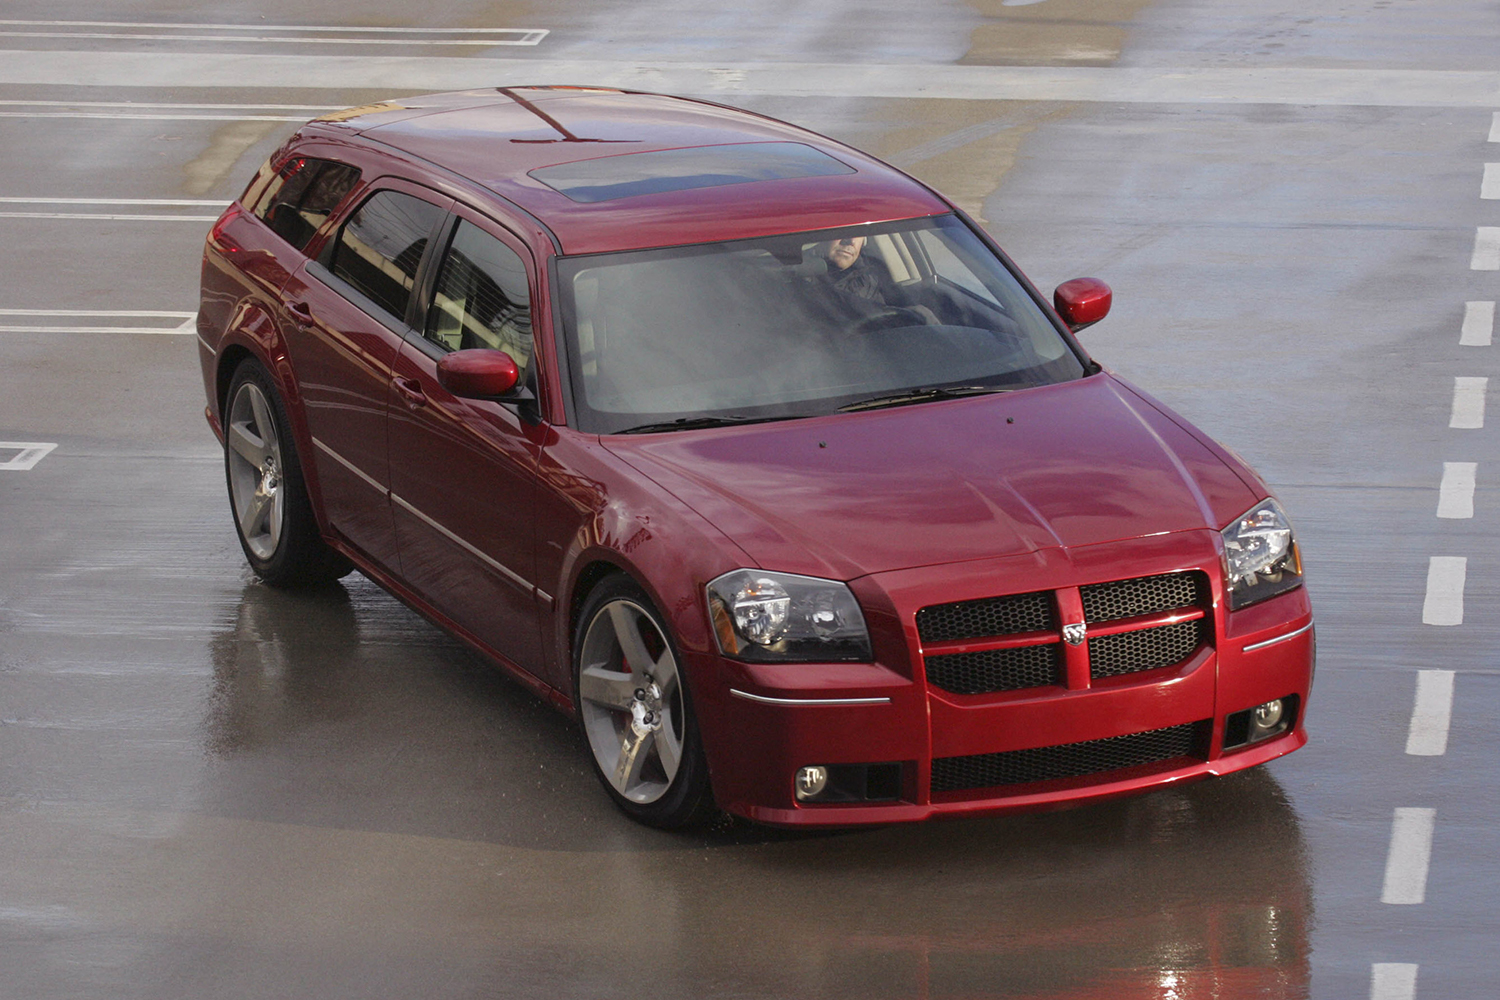 A 2006 red Dodge Magnum SRT8 wagon that has the potential to become a modern classic car